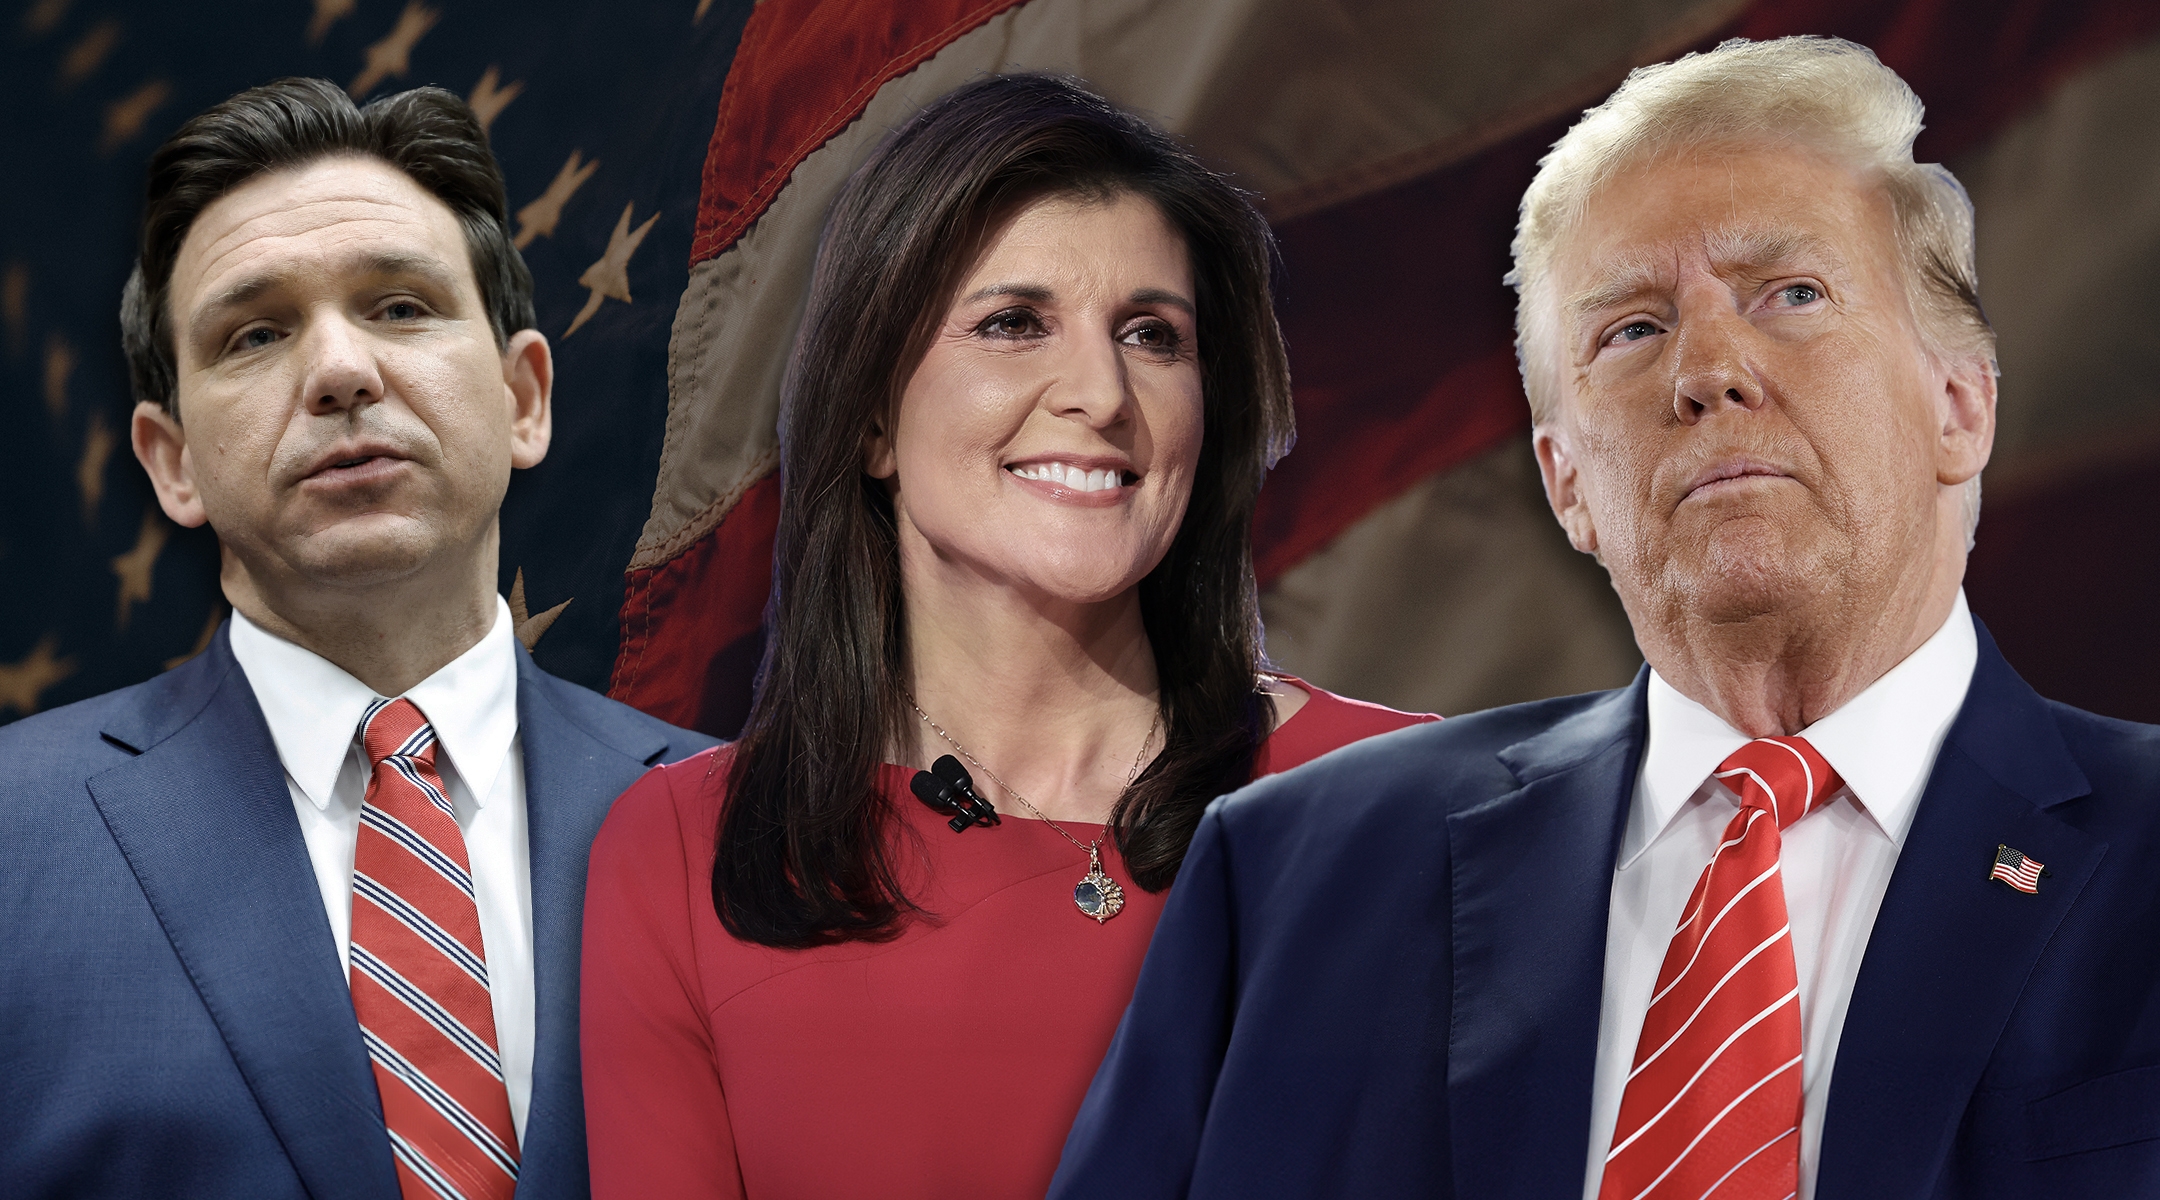 Ron De Santis, Nikki Haley and Donald Trump. (Photos by Getty Images/Background by Samuel Branch on Unsplash)